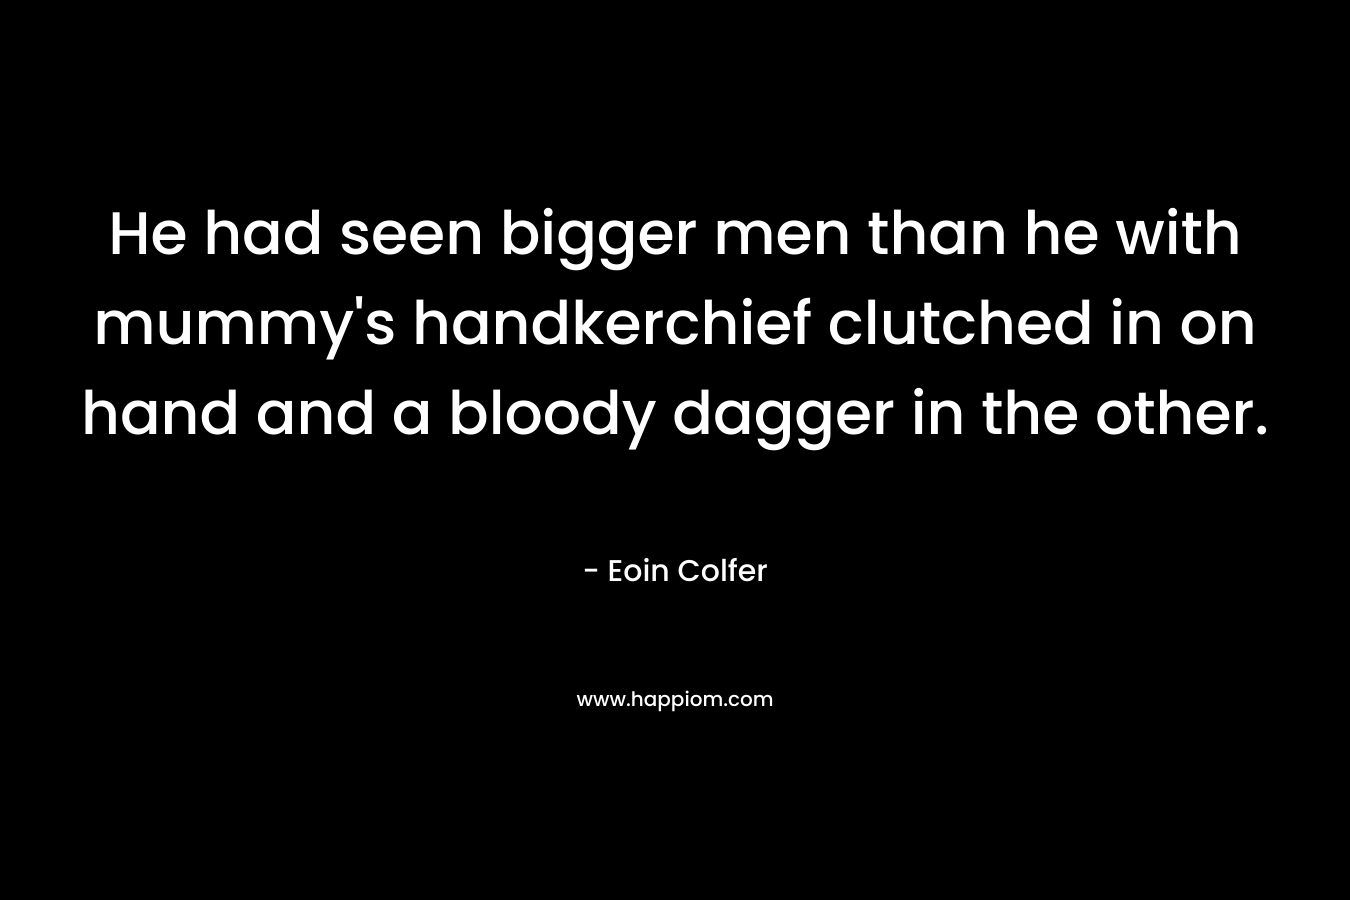 He had seen bigger men than he with mummy’s handkerchief clutched in on hand and a bloody dagger in the other. – Eoin Colfer